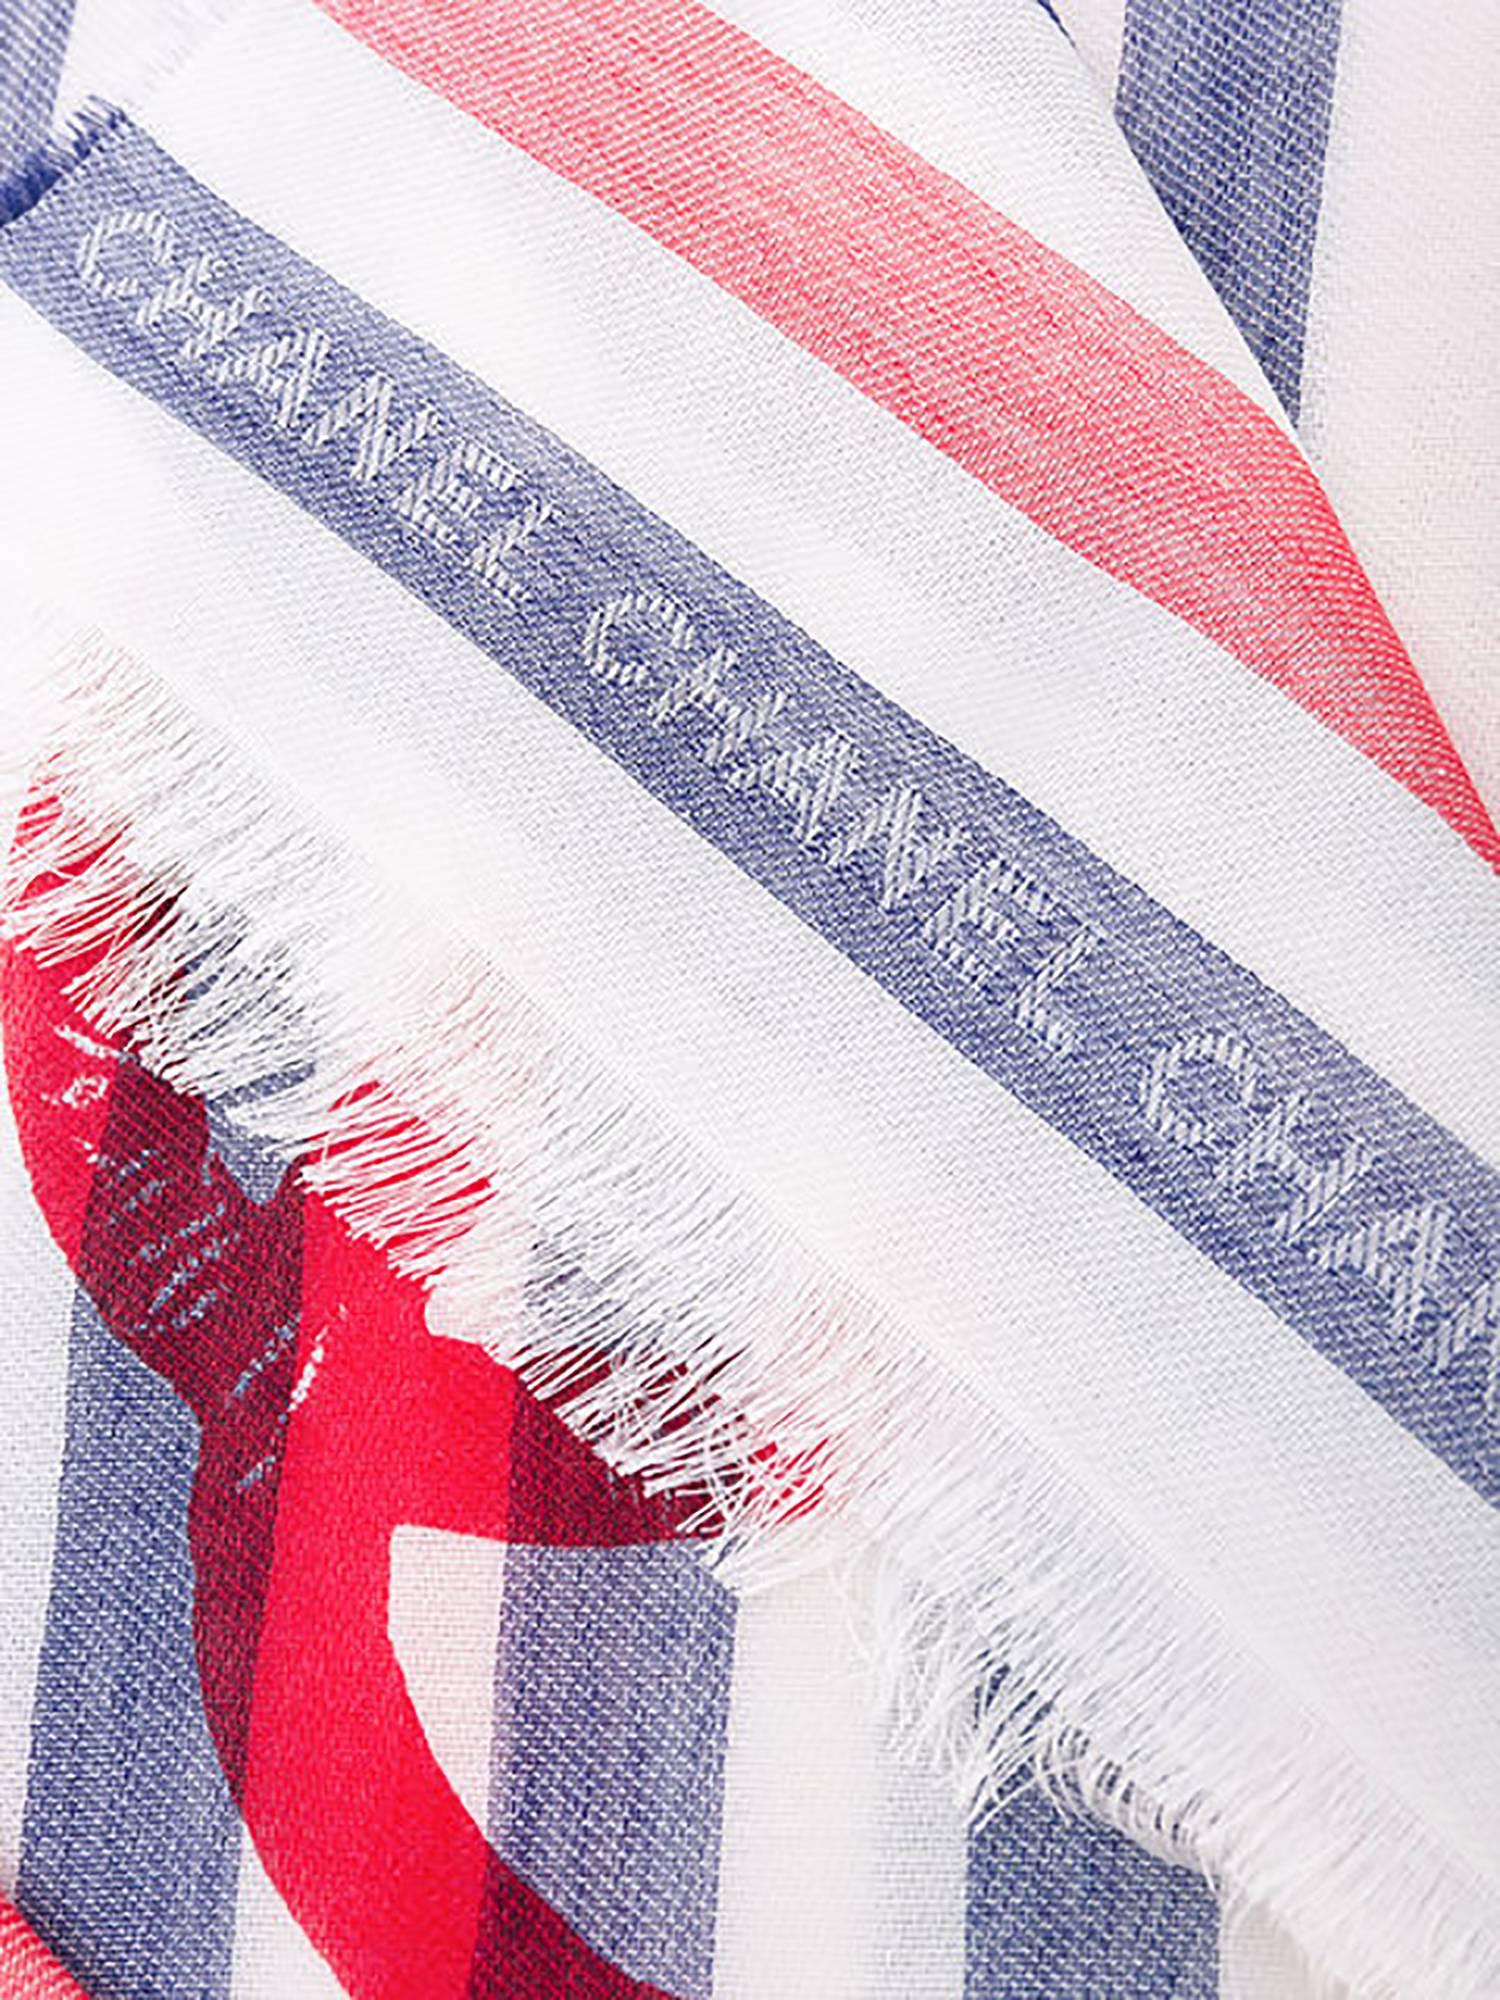 Multicoloured cashmere-silk blend striped logo scarf from Chanel Vintage featuring fringed edges.

Dimensions: L180cm x H70cm

Please note that vintage items are not new and therefore might have minor imperfections.

Made in France